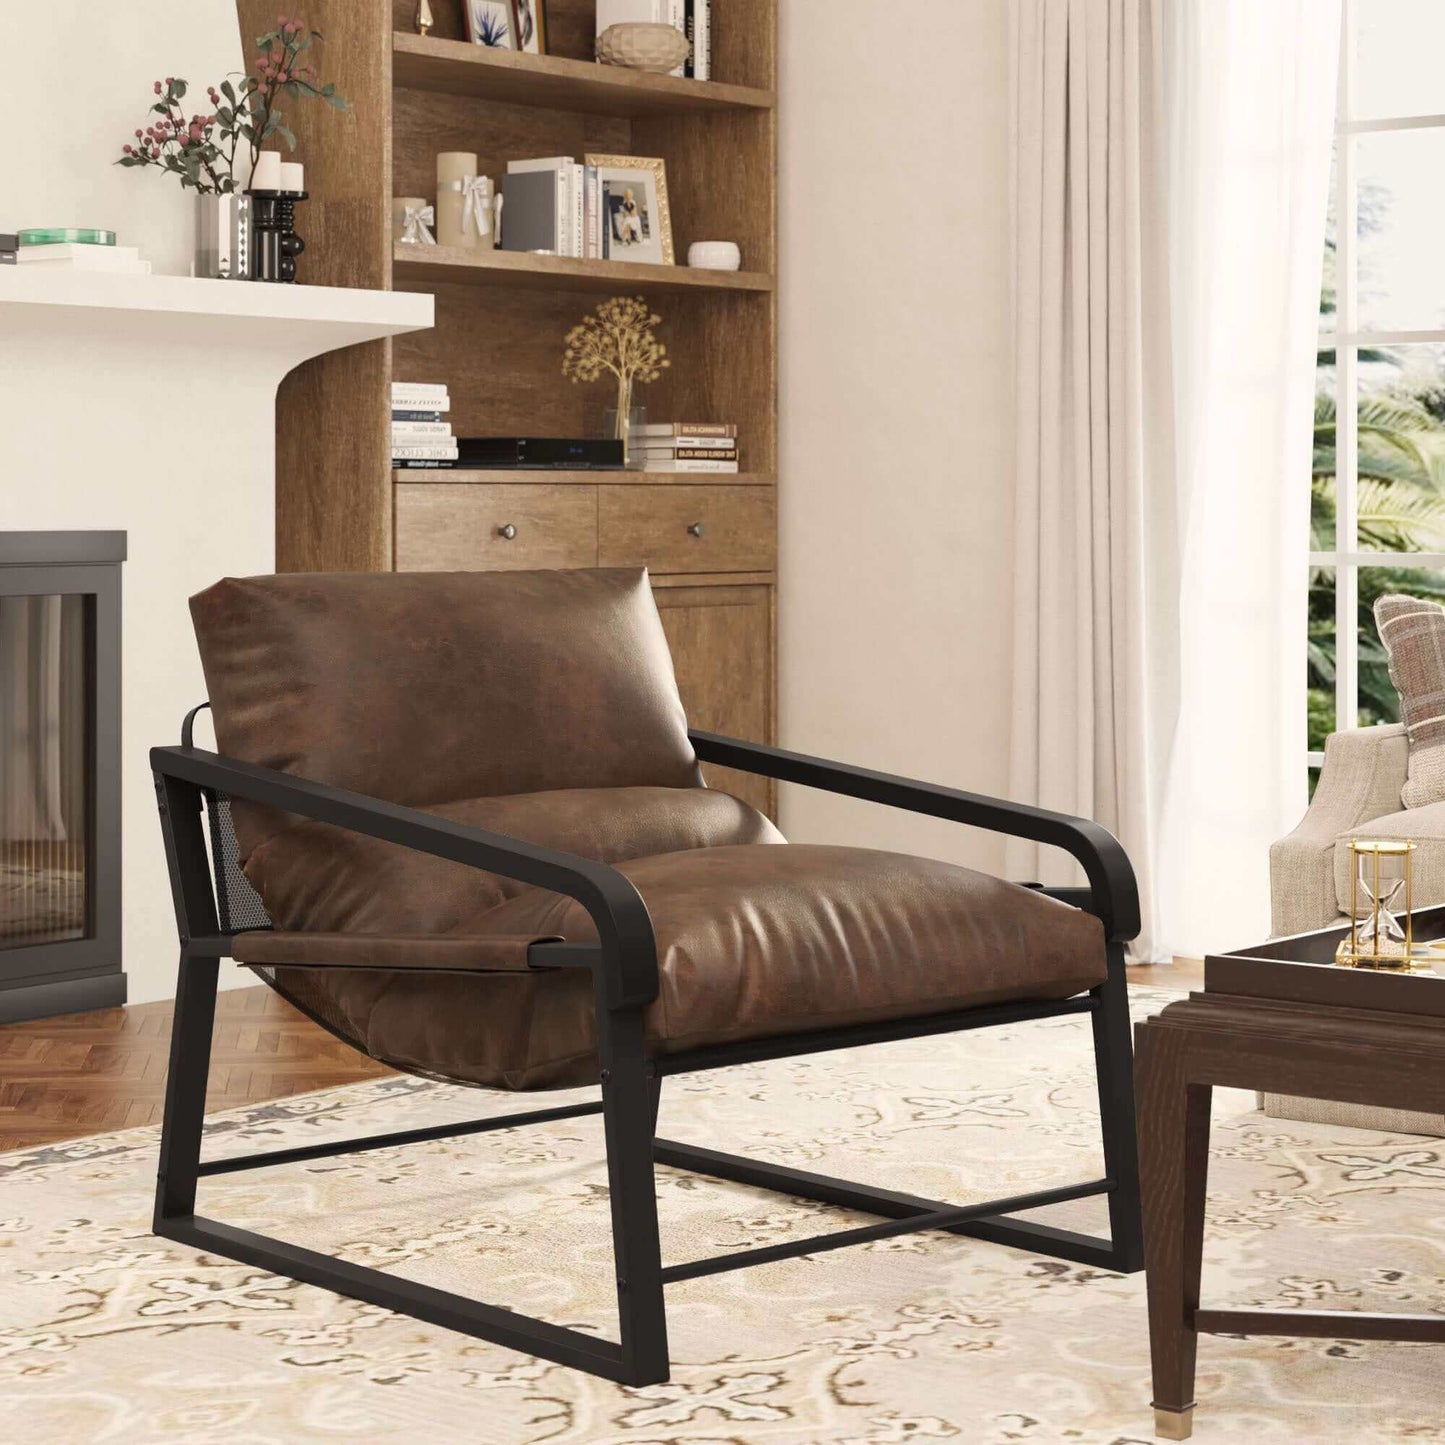 Modern Metal Frame Accent Lounge Chair, Comfy Armchair - Brown, Beige or Gray - Revel Sofa 